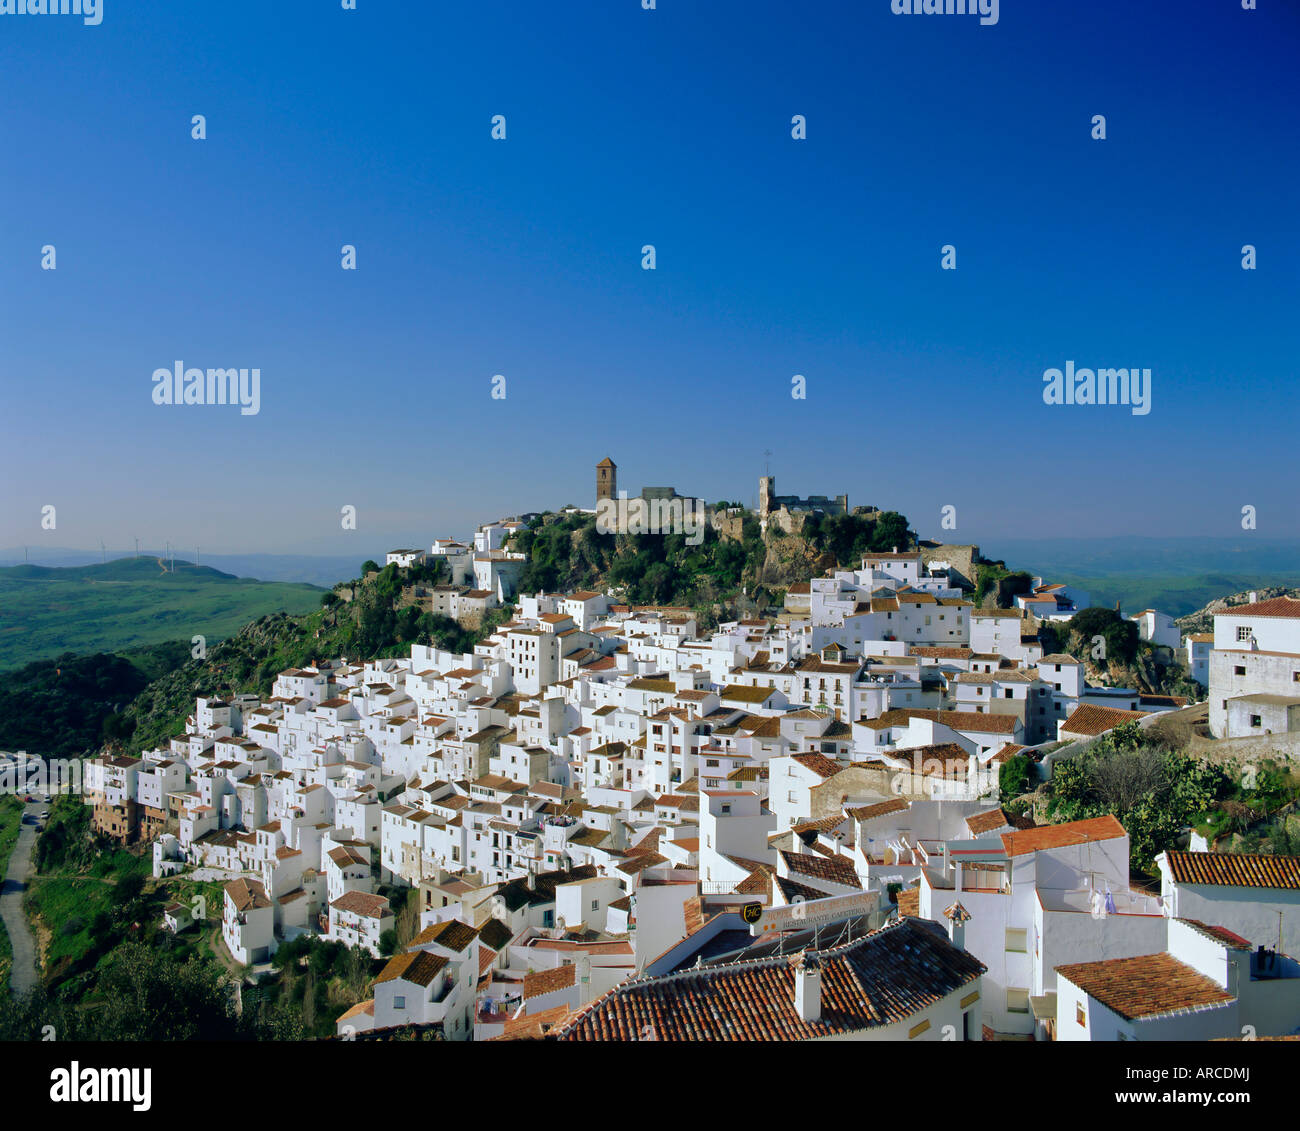 View of village from hillside, Casares, Malaga, Andalucia (Andalusia), Spain, Europe Stock Photo